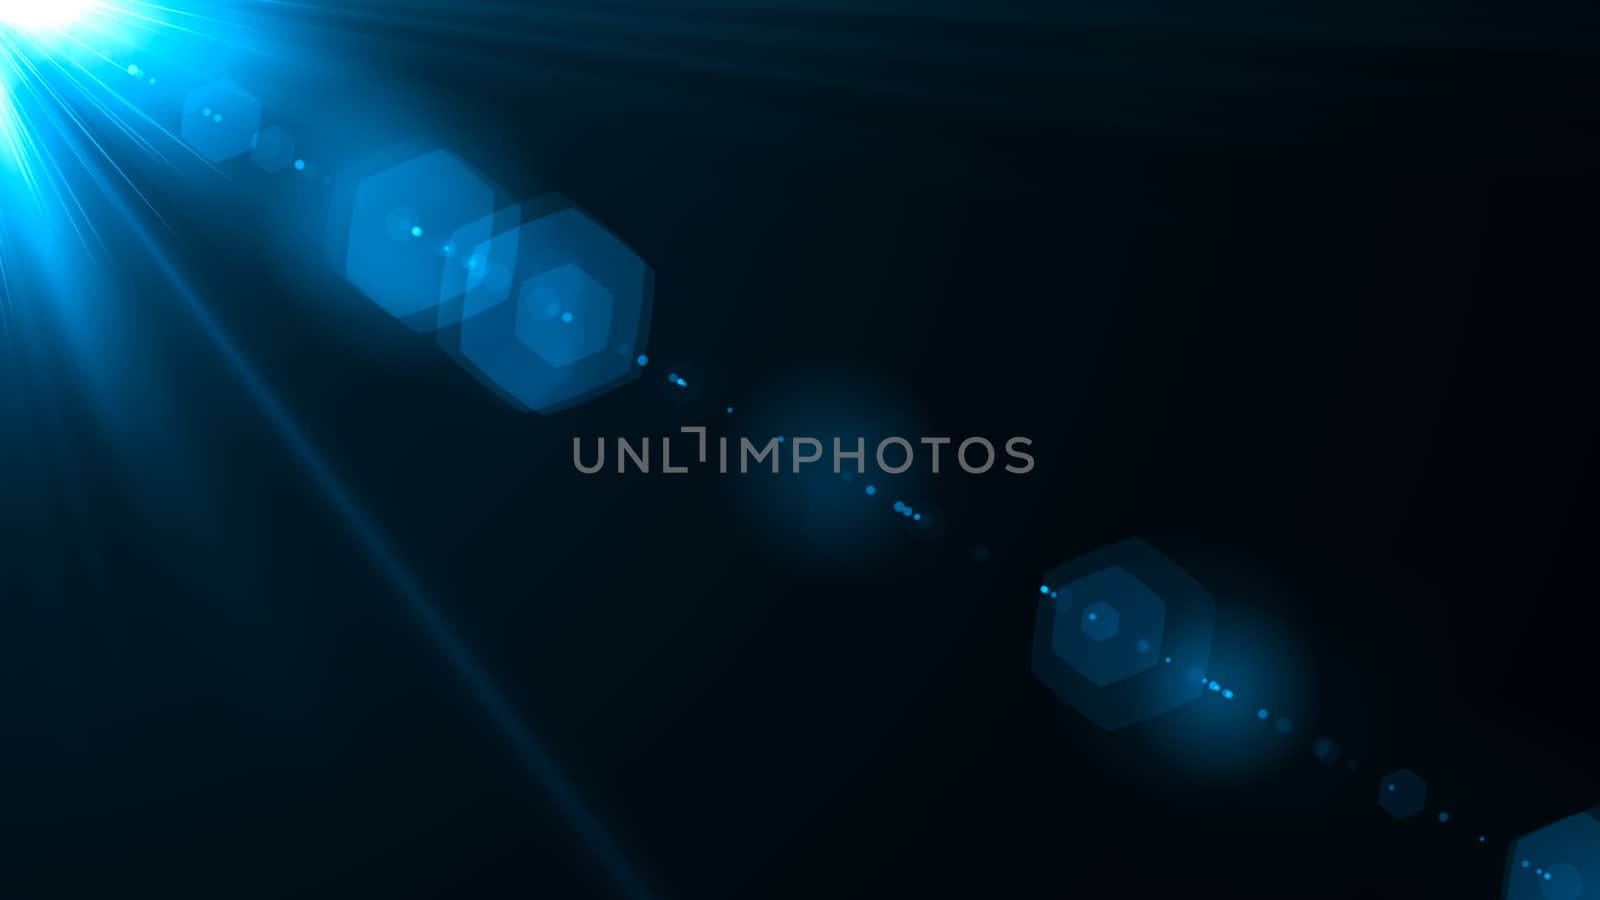 Digital lens flare in black bacground by nolimit046